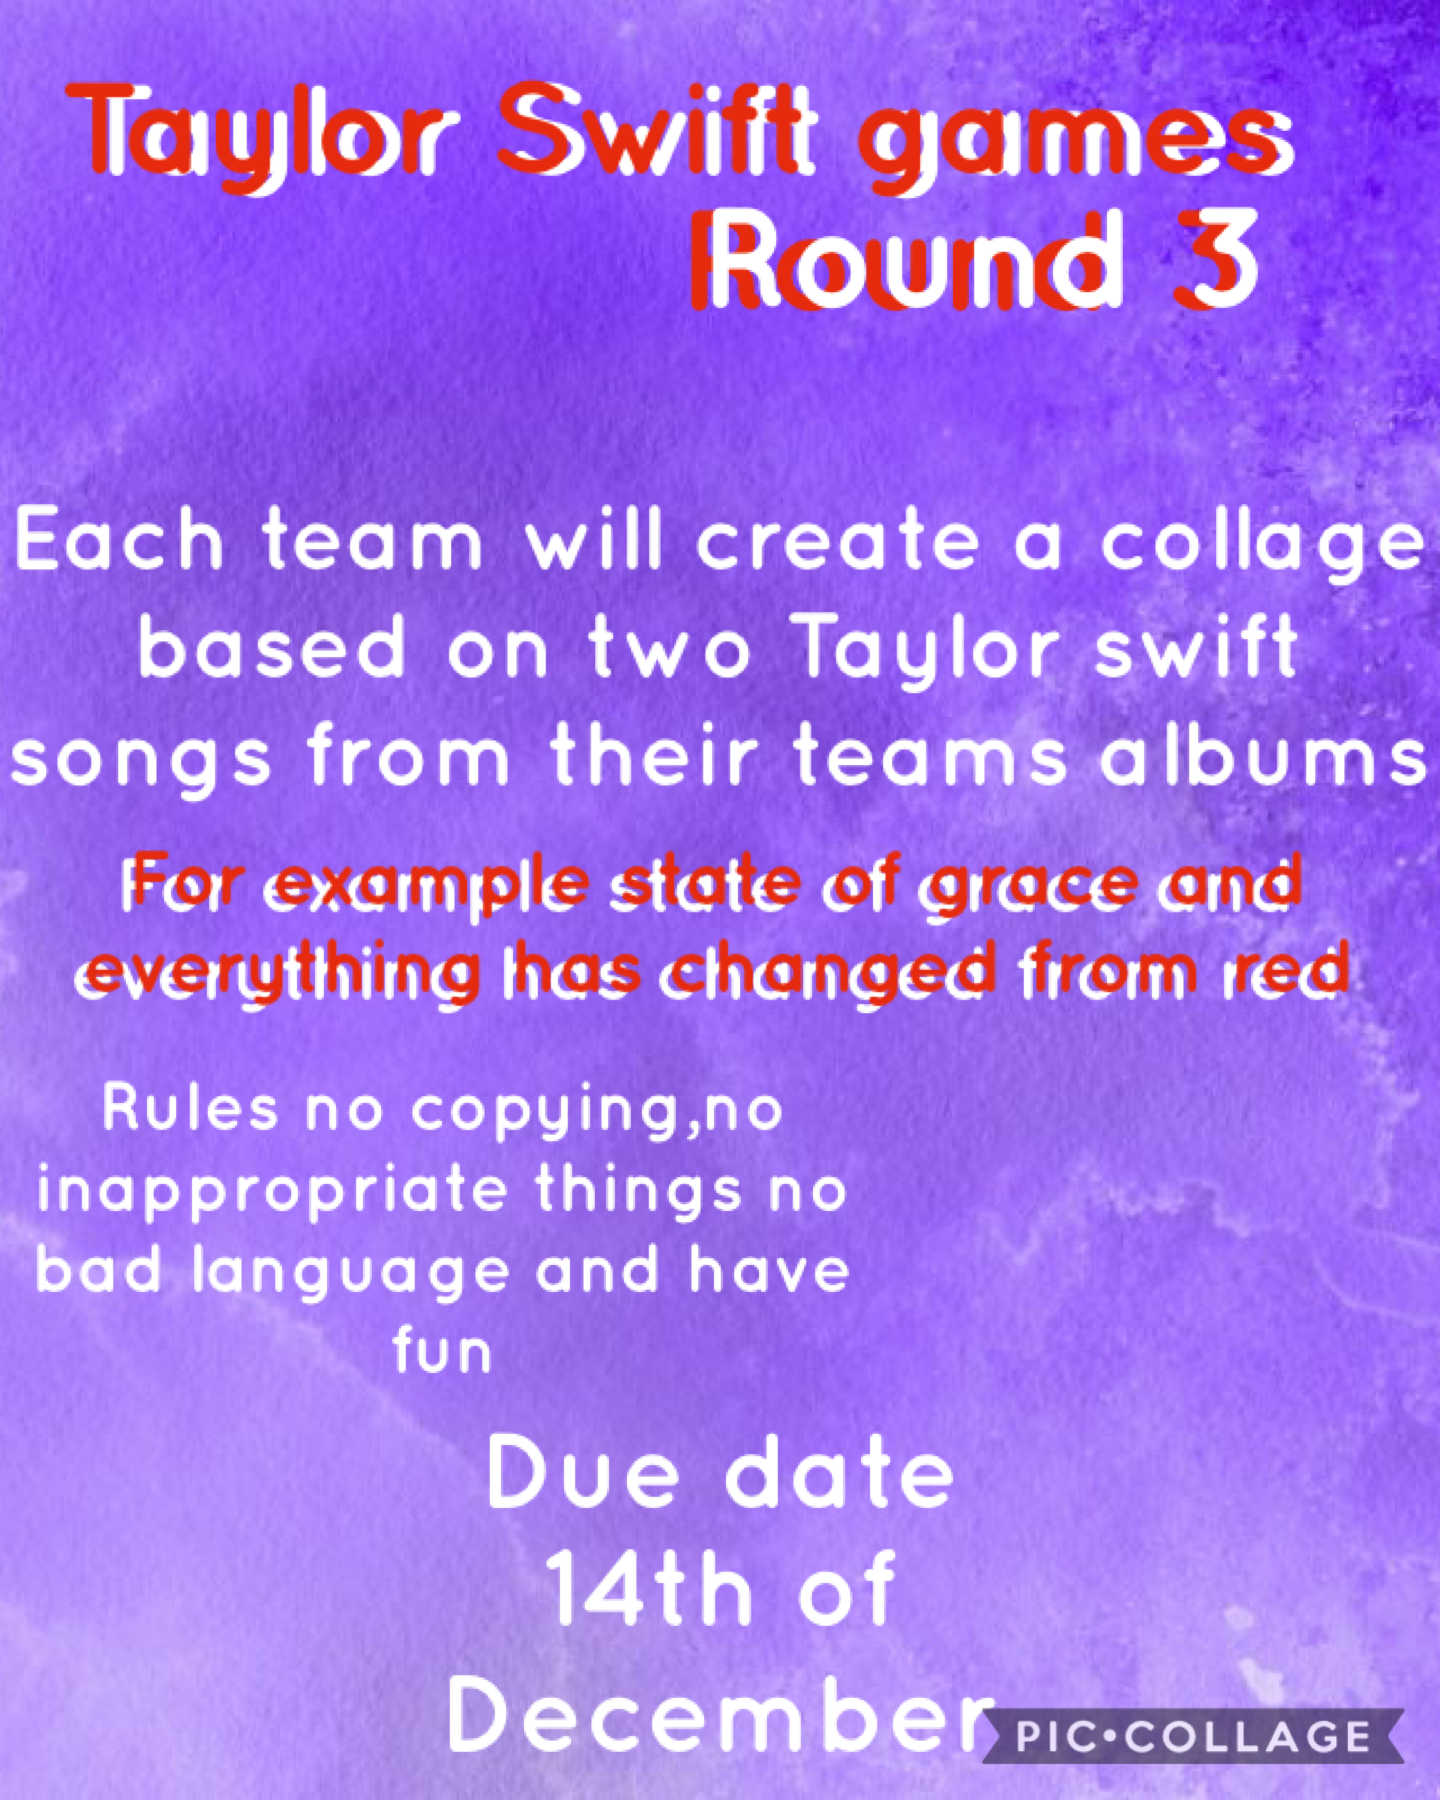 Round 3 of the Taylor Swift games